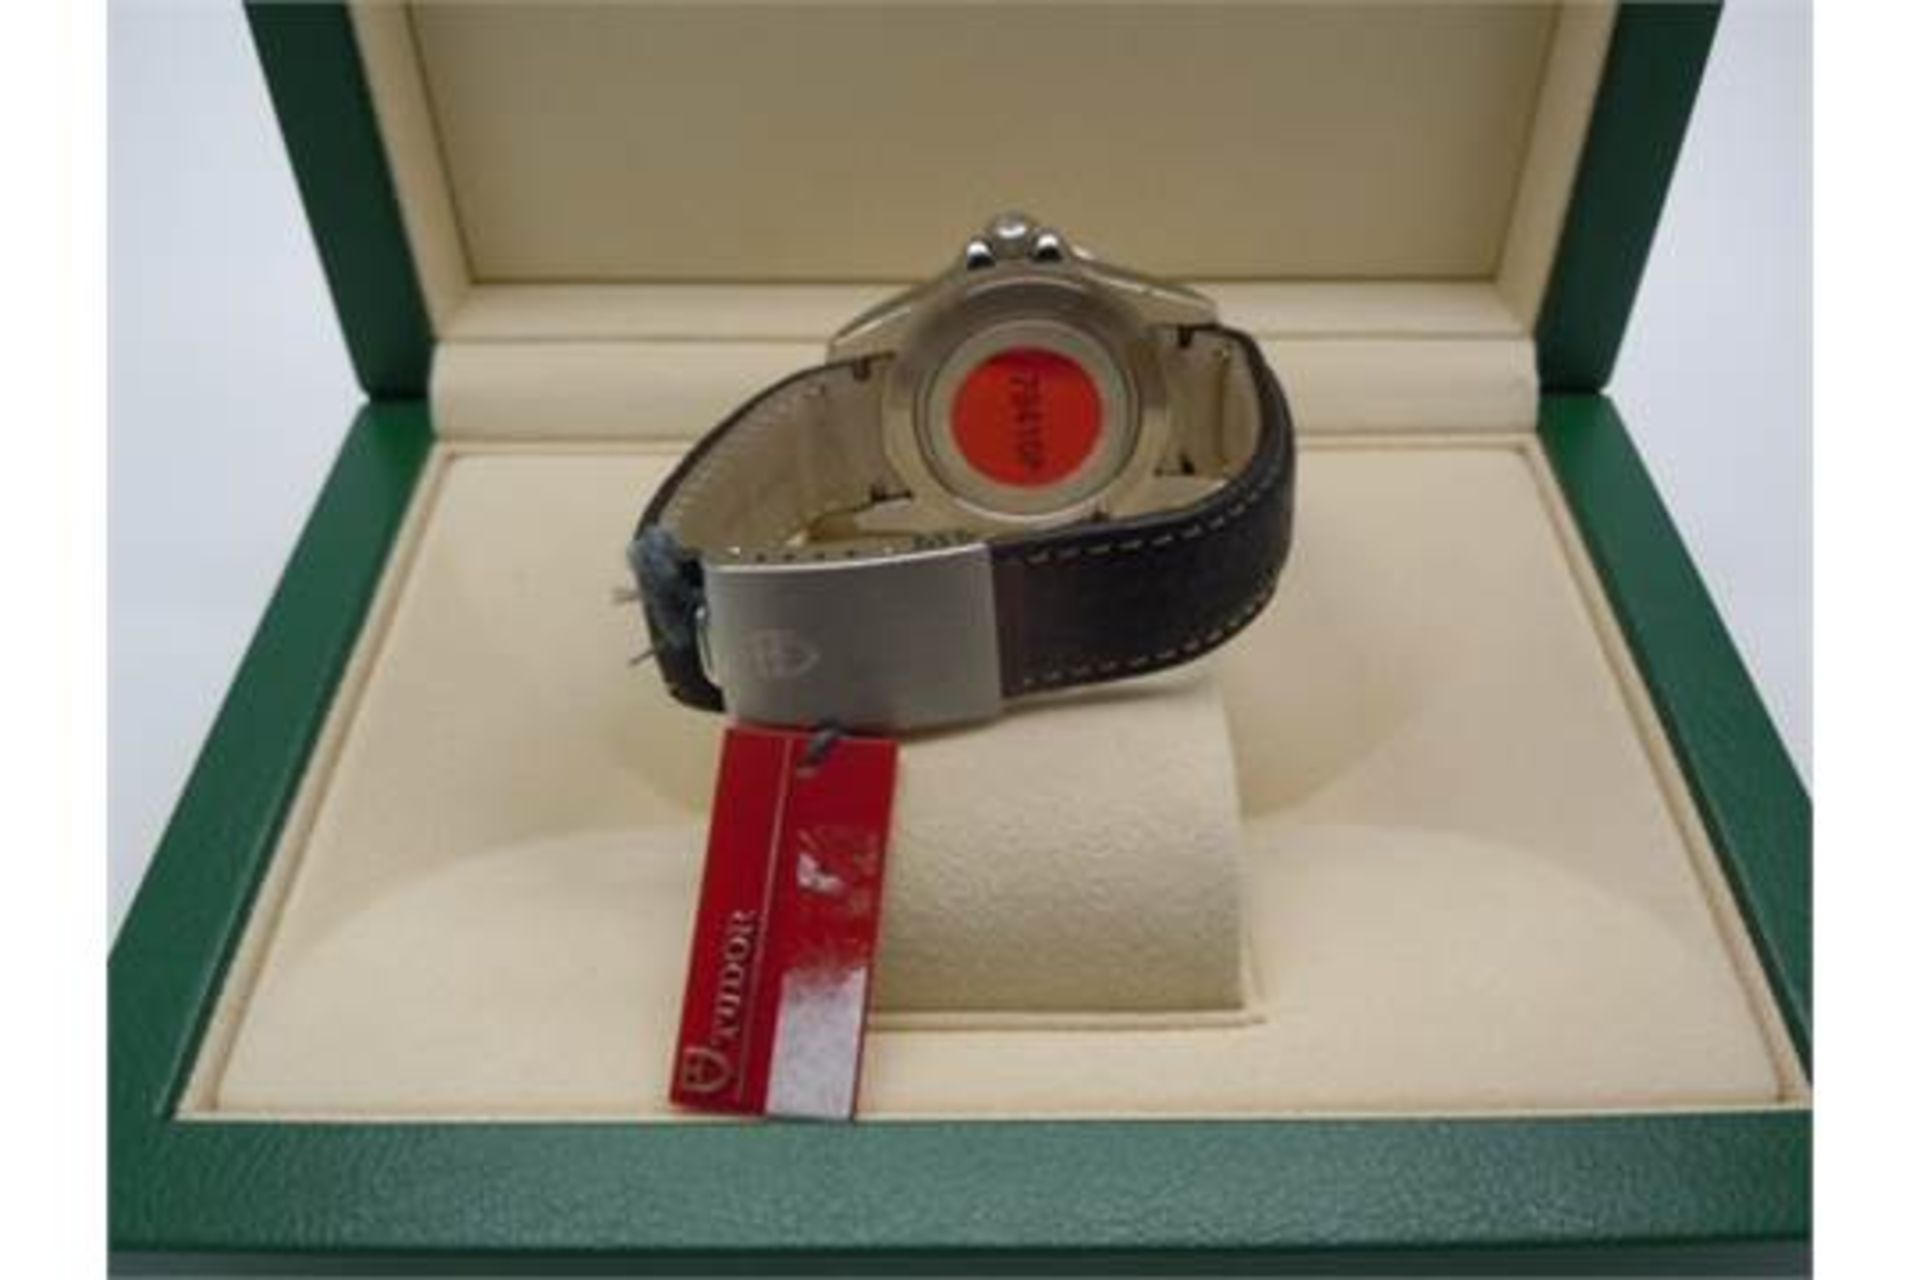 BRAND NEW OLD STOCK TUDOR PRINCE DATE ROTOR SELF WINDING WATCH STILL WITH STICKERS BOXED - Image 3 of 6